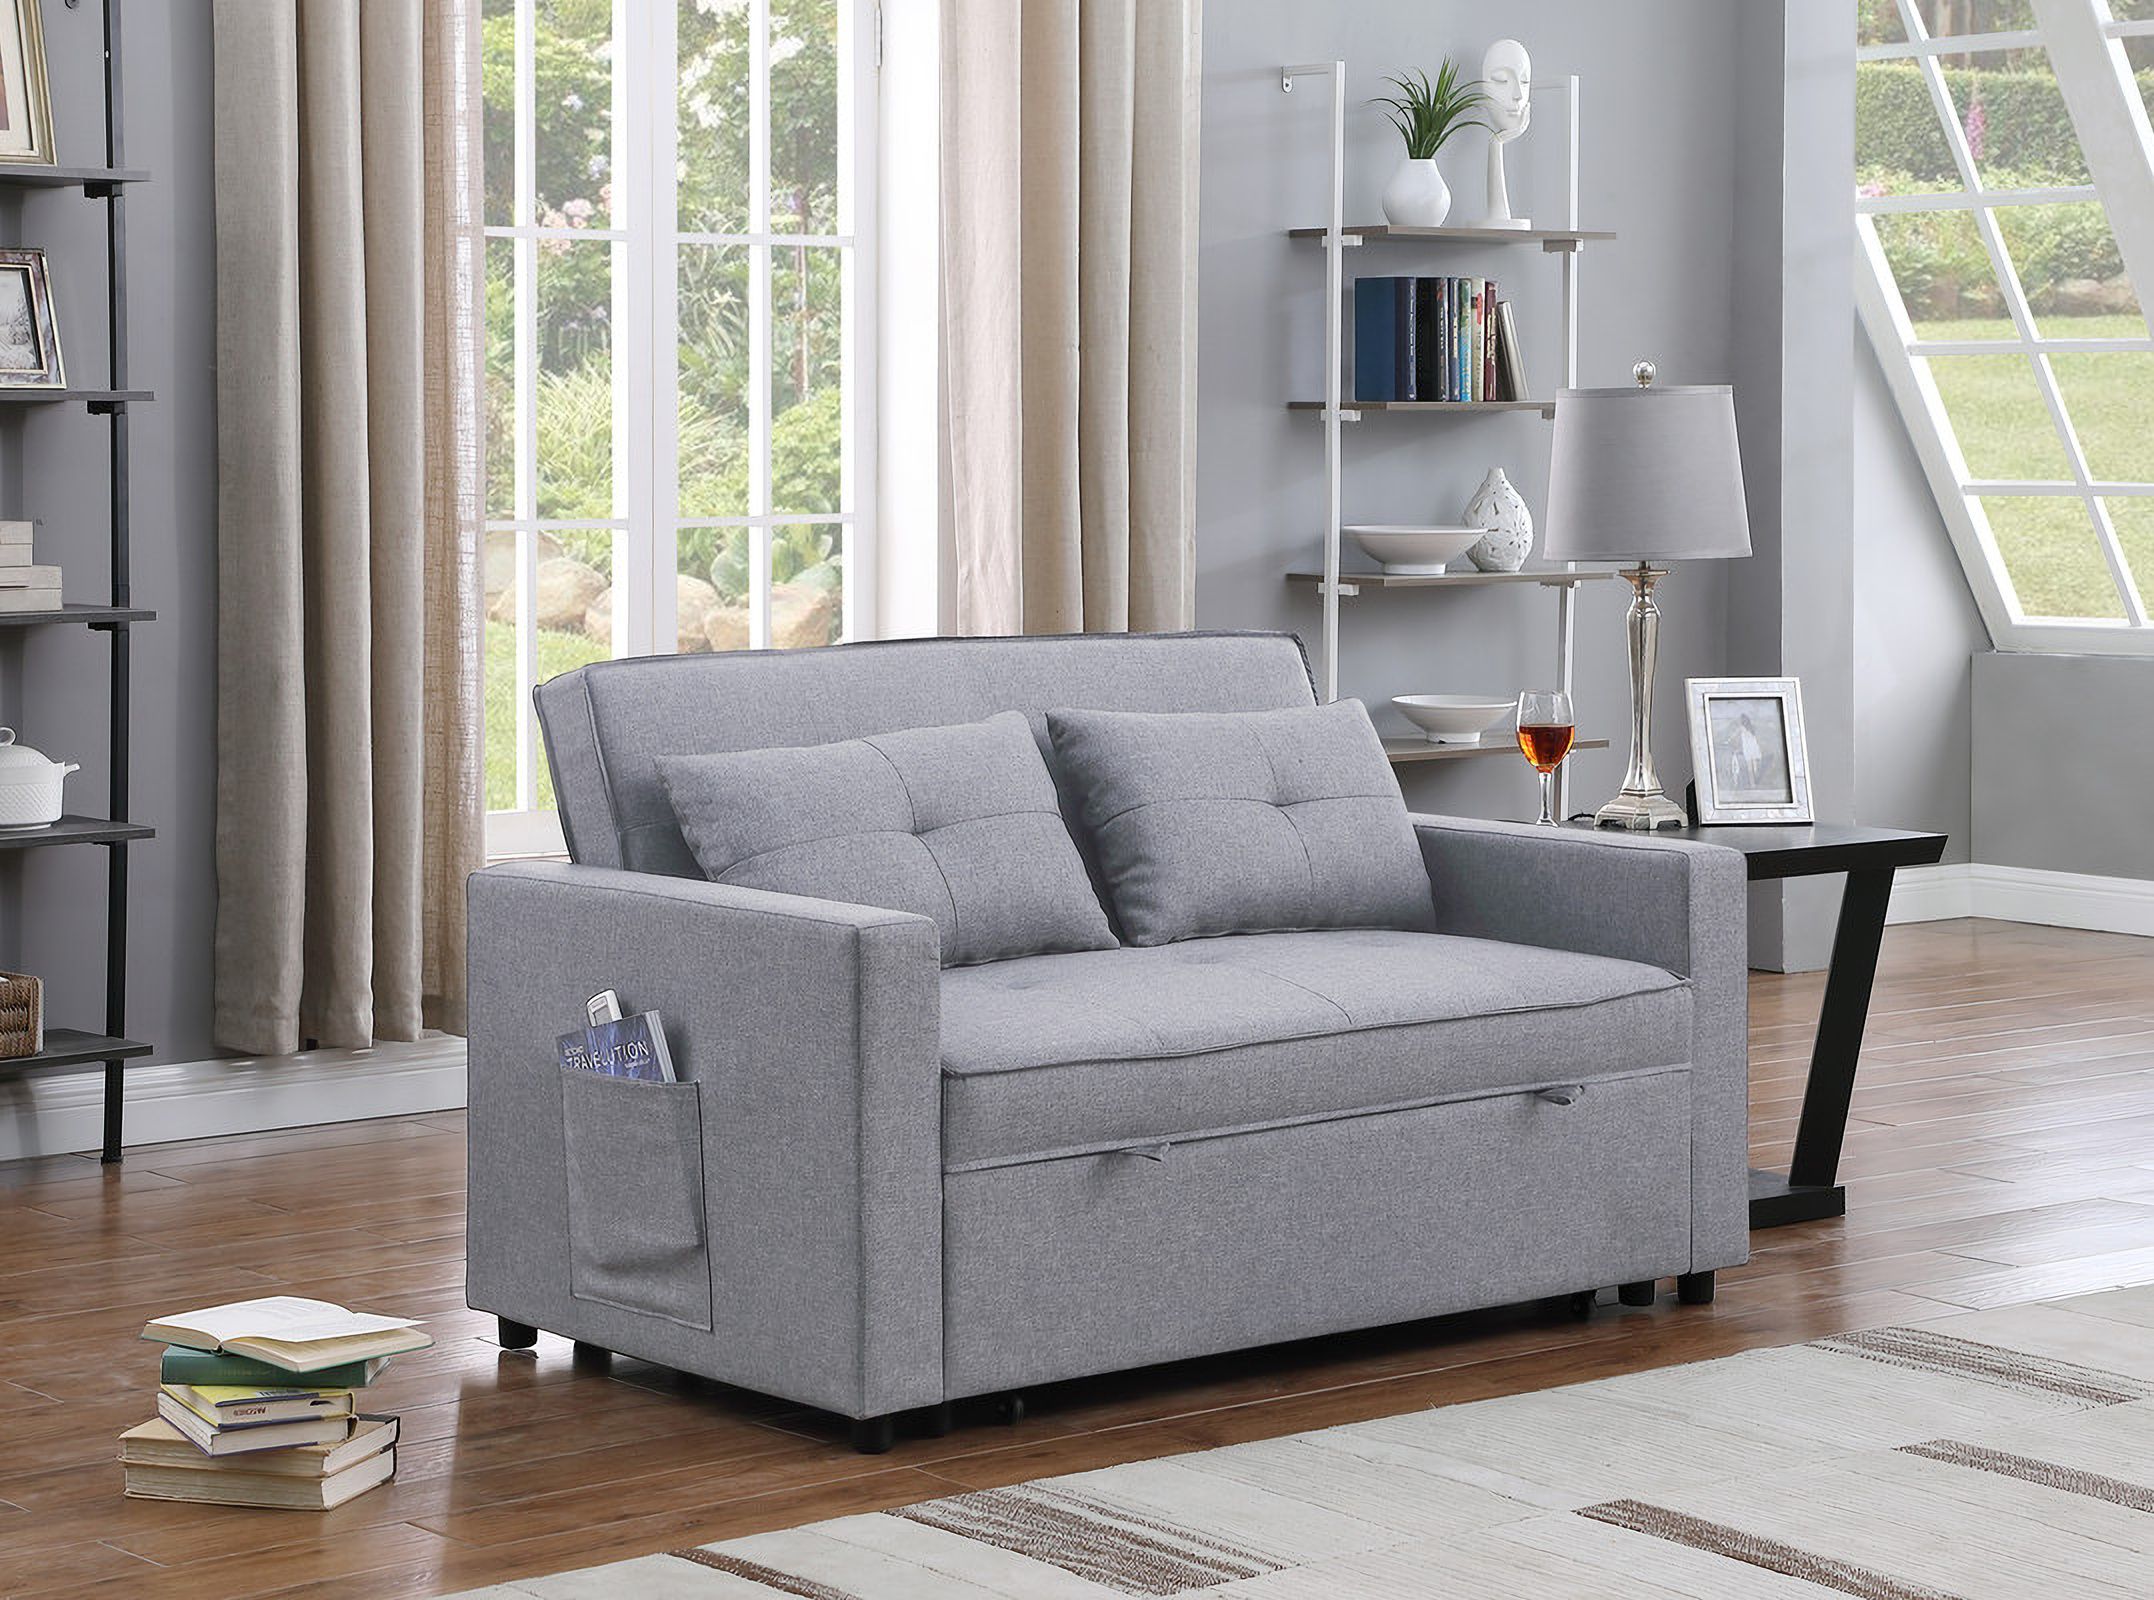 Zoey Light Gray Linen Convertible Sleeper Loveseat With Side Pocket Lilola Home | 1stopbedrooms For Convertible Light Gray Chair Beds (View 5 of 15)